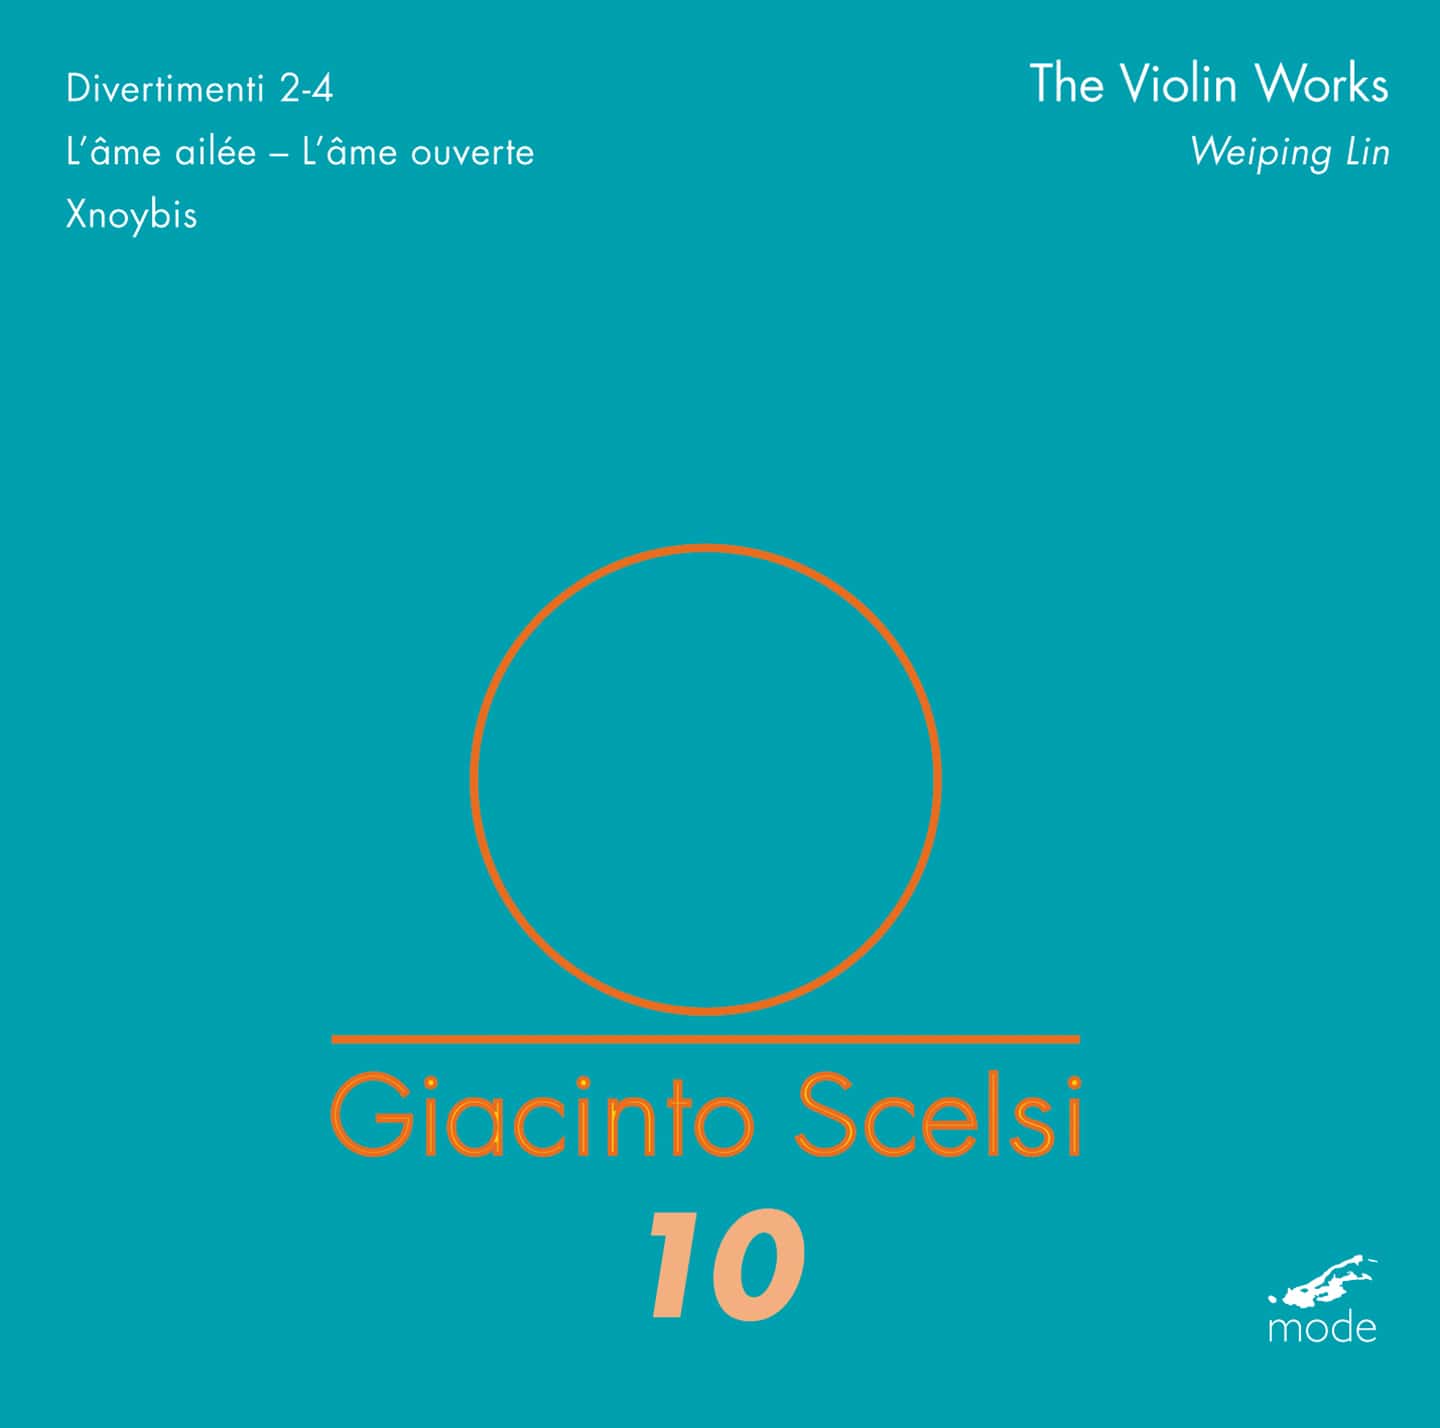 Scelsi Edition 10 – The Violin Works